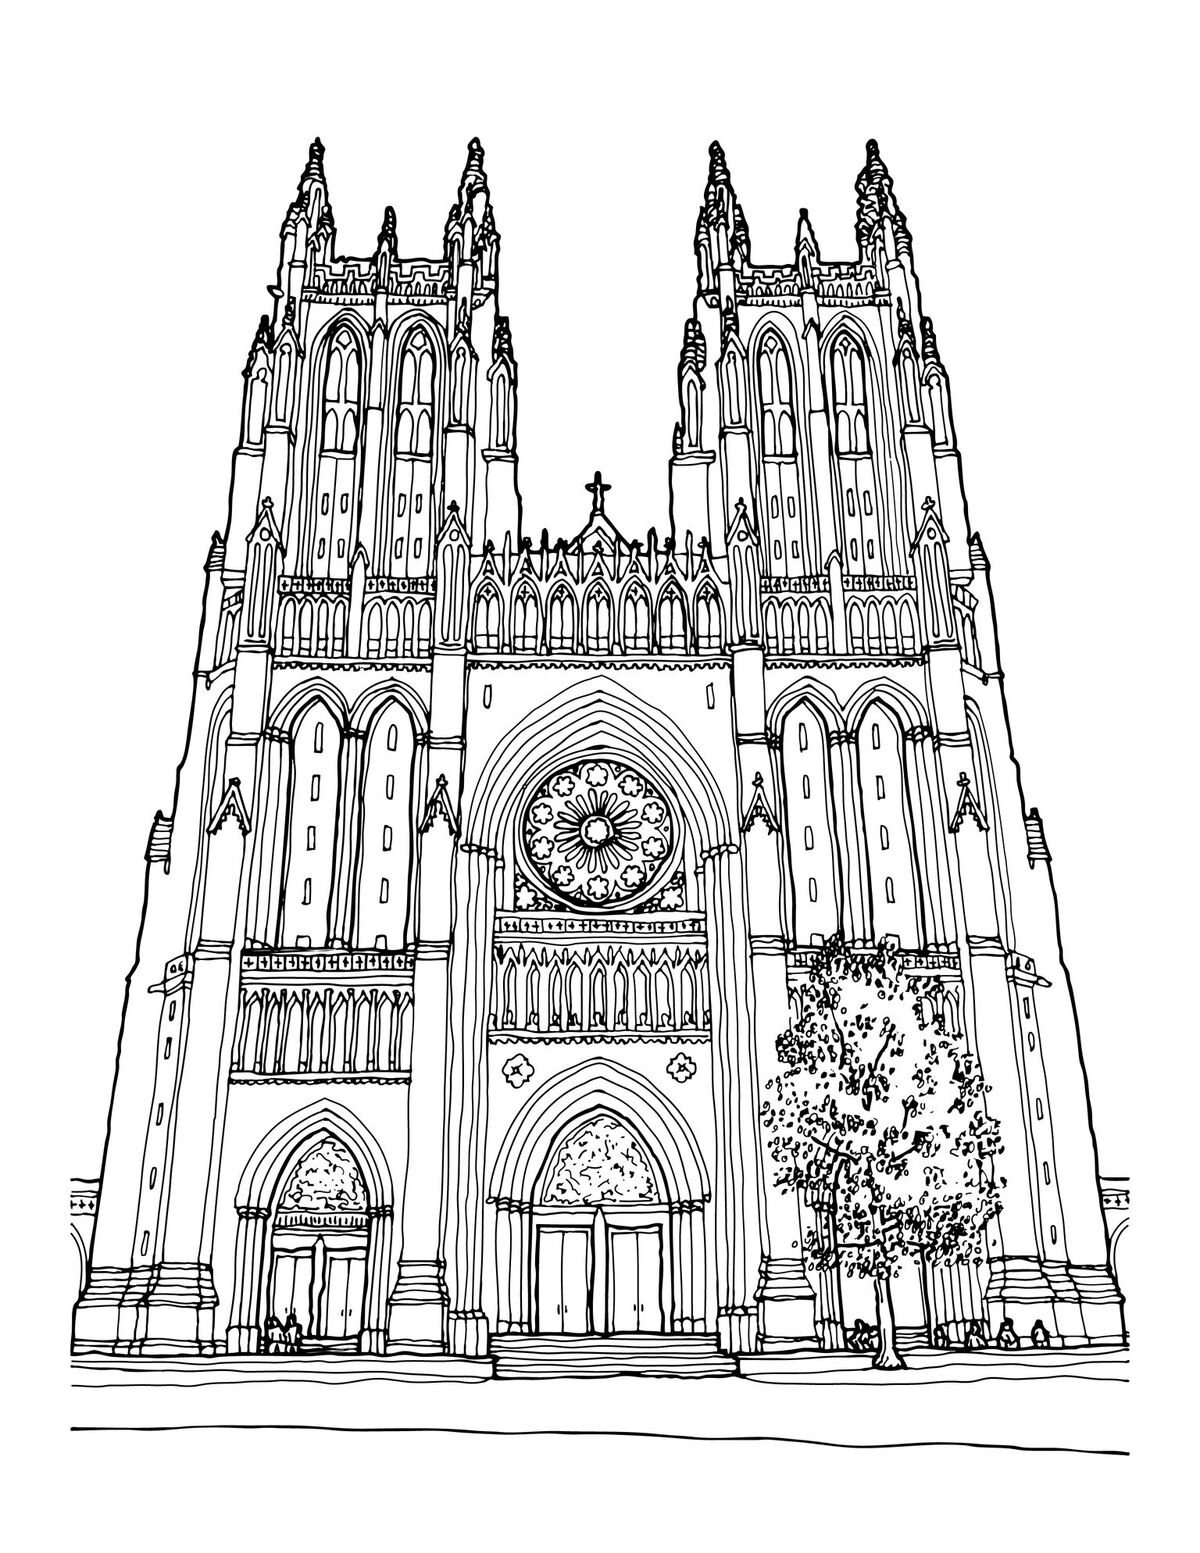 Architecture Coloring Pages Printable Pdf - Coloring Pages Architecture